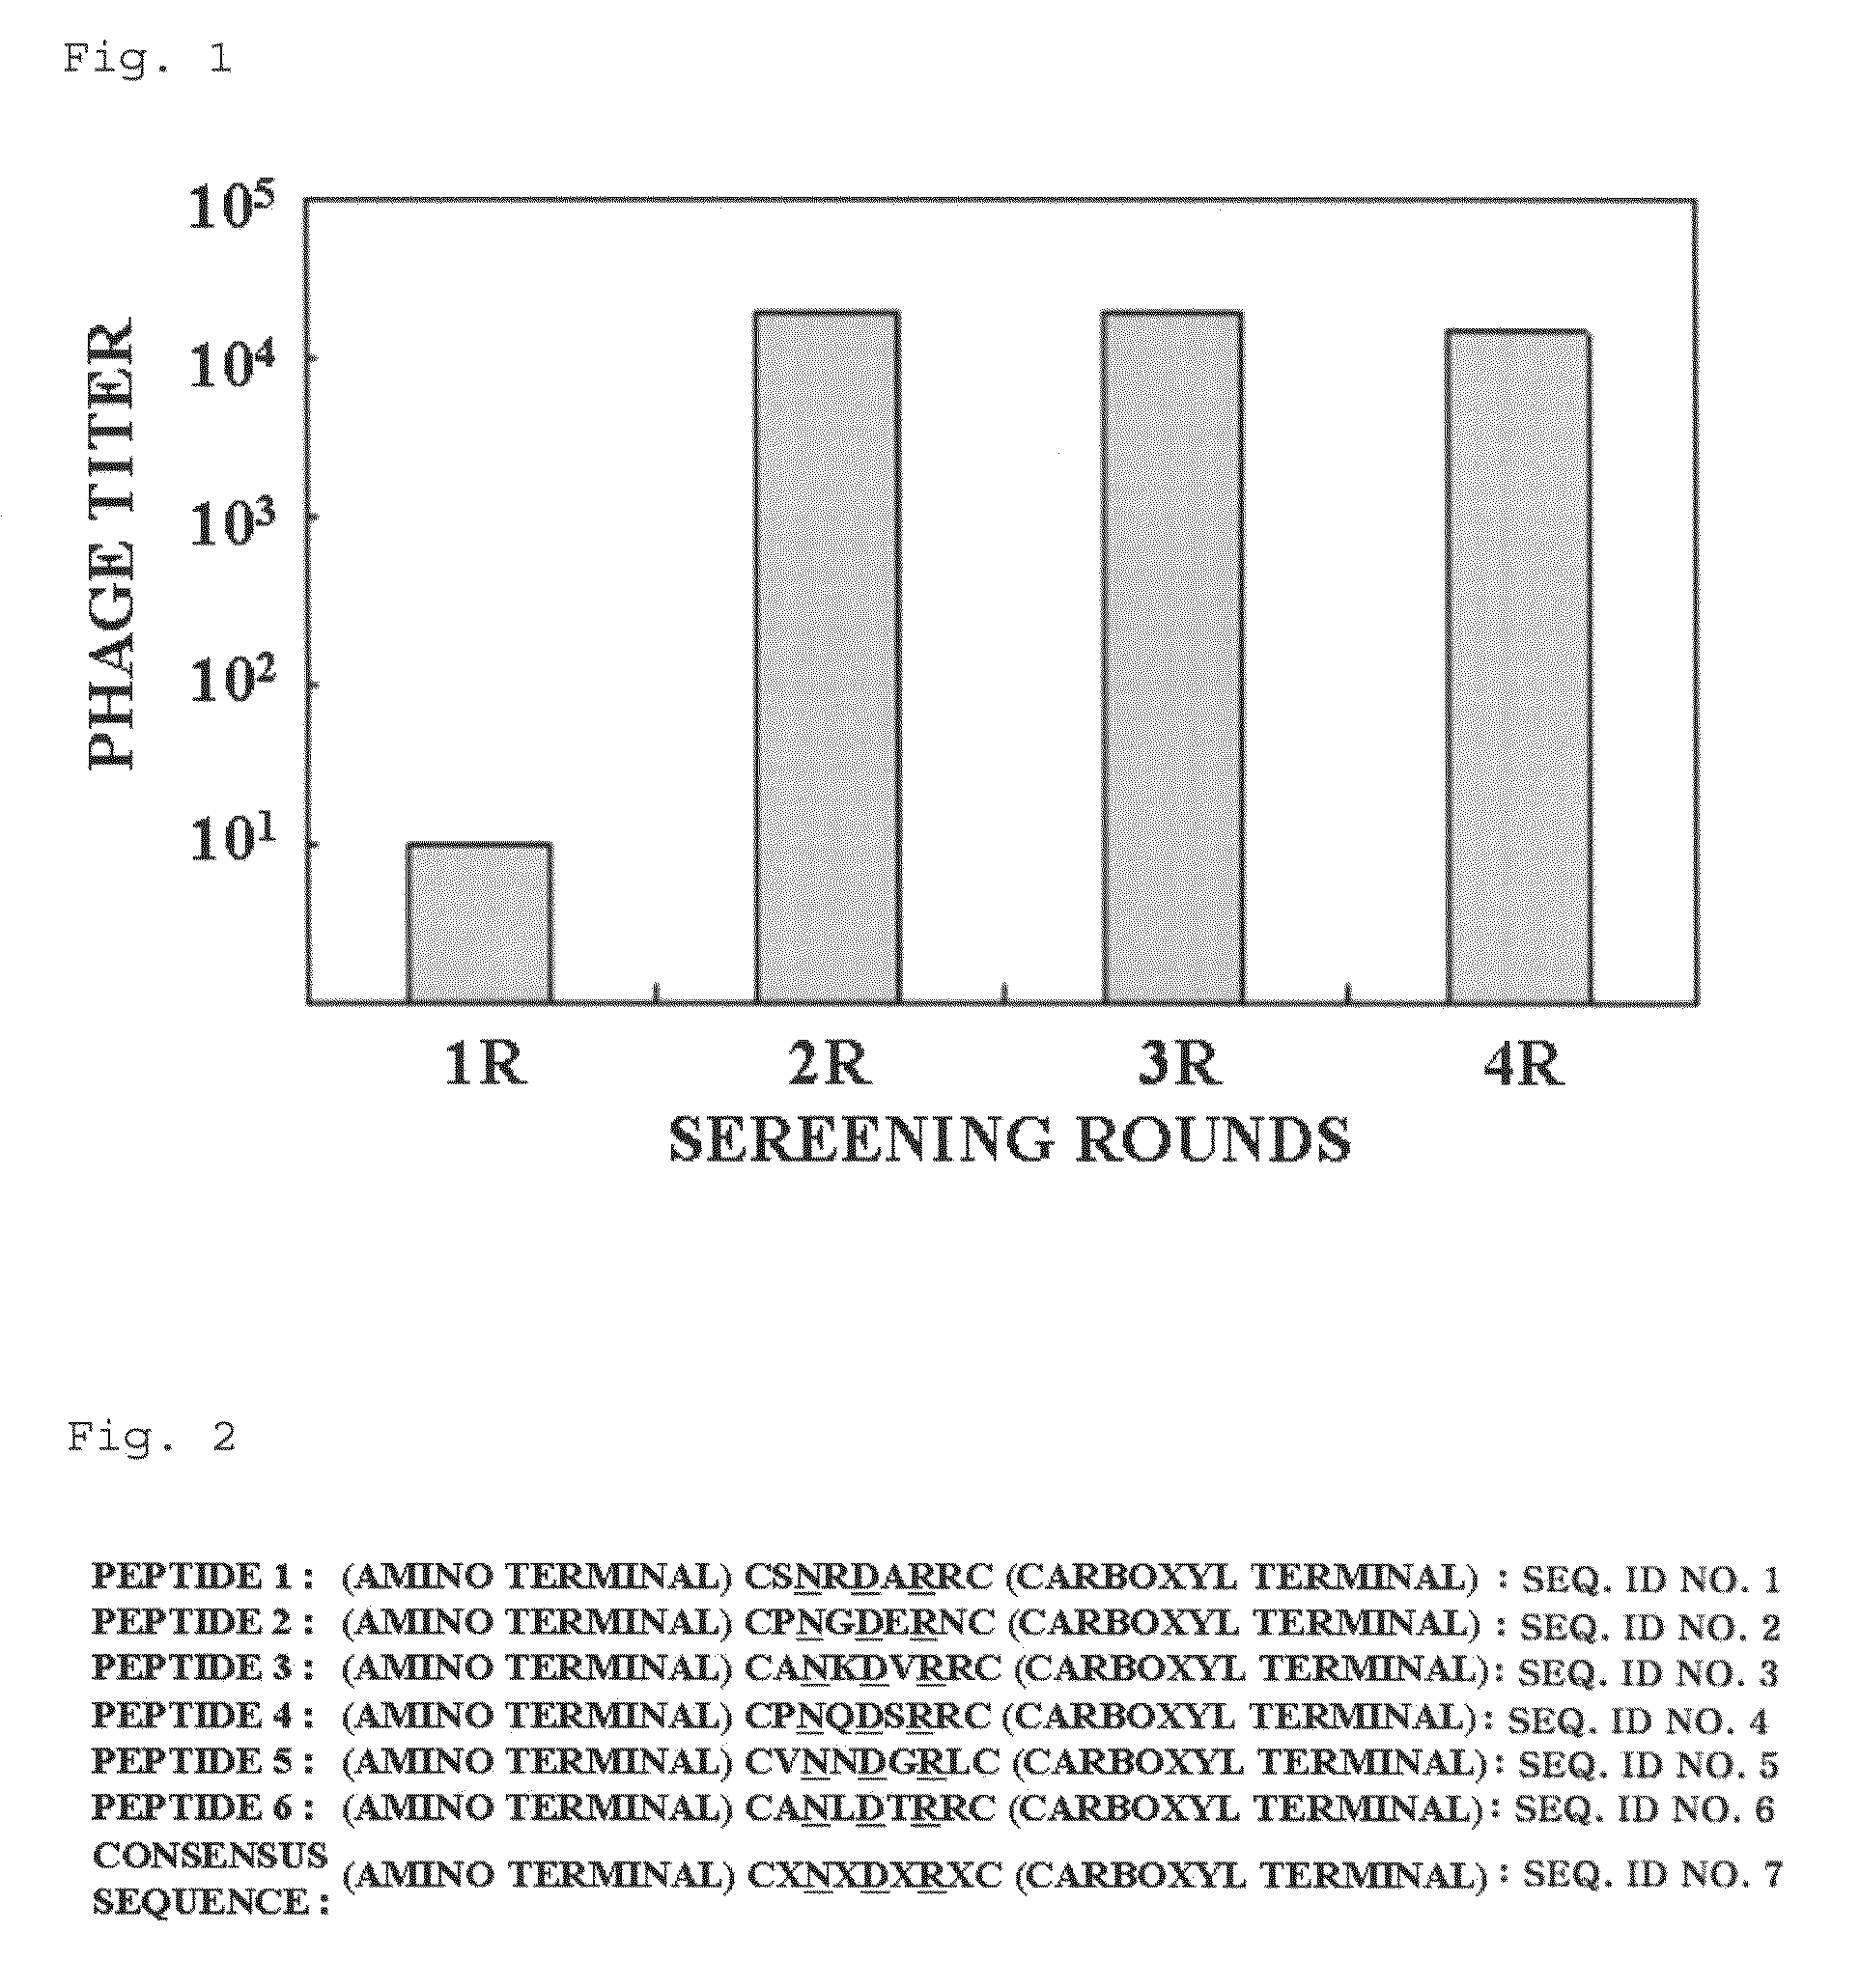 Bladder tumor-targeting peptide and use thereof